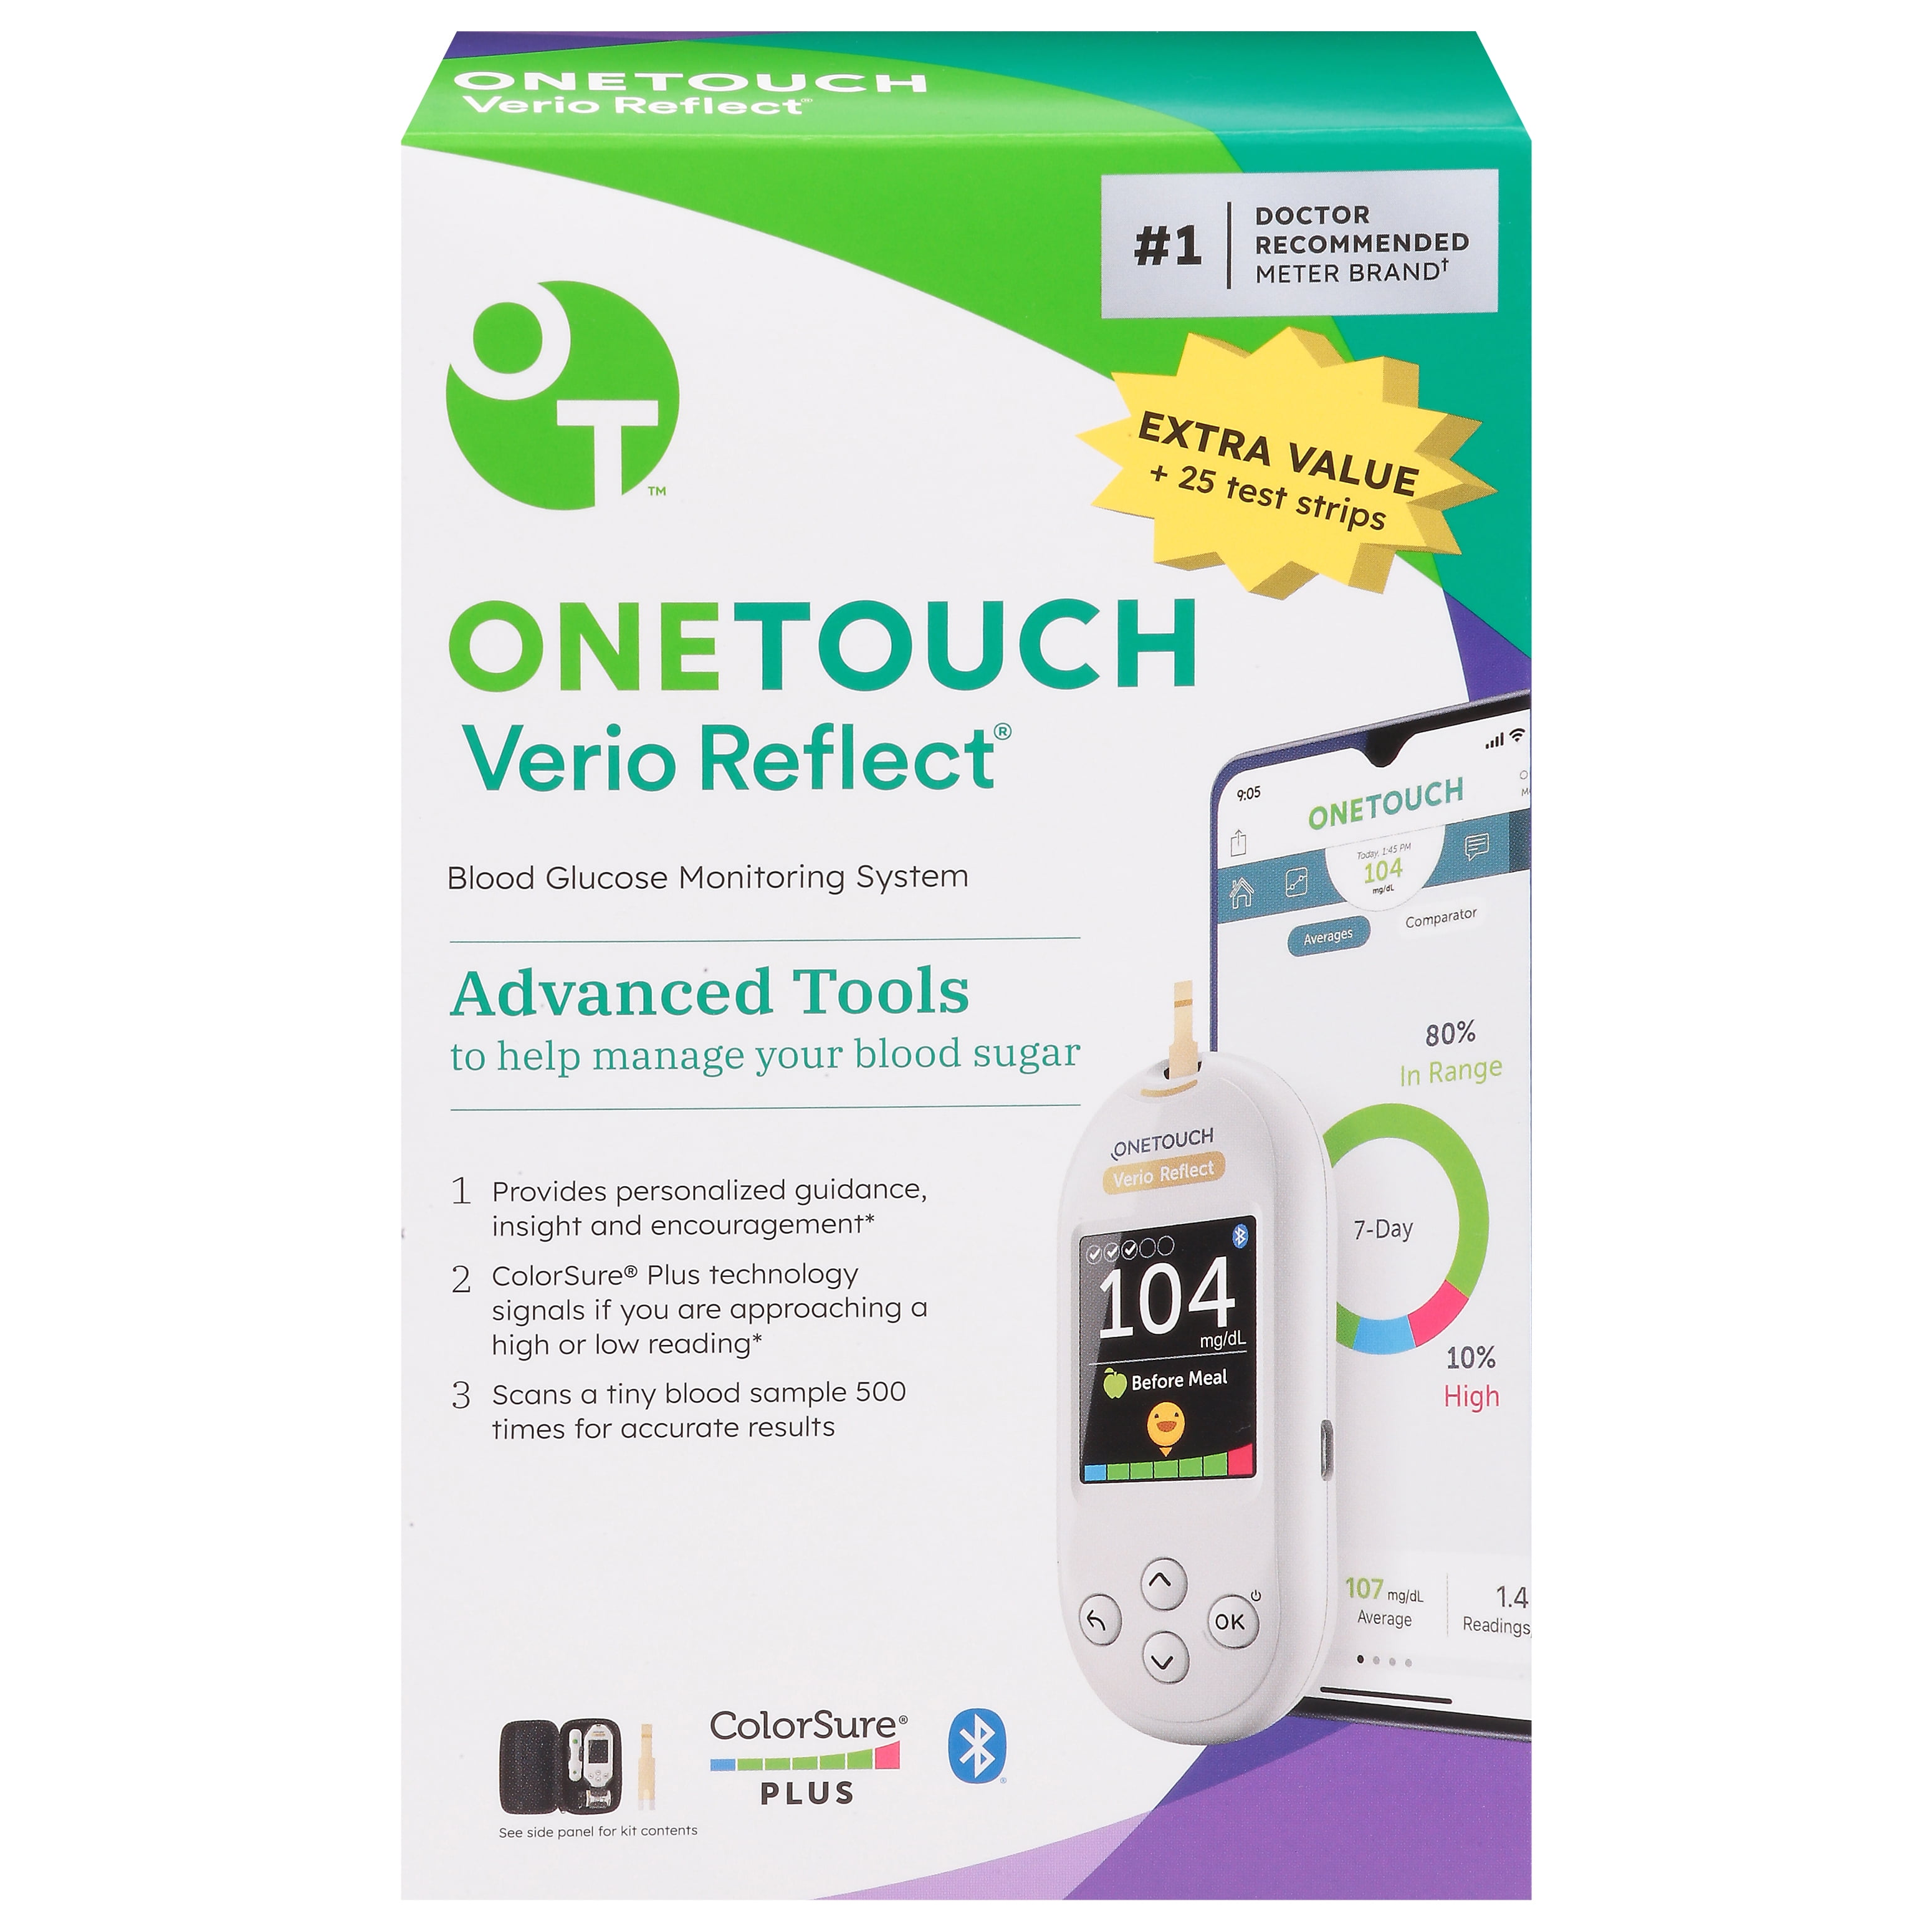  OneTouch Blood Sugar Test Kit, Includes OneTouch Verio Reflect  Blood Glucose Meter, 1 Lancing Device, 30 Lancets, 30 Test Strips, &  Carrying Case